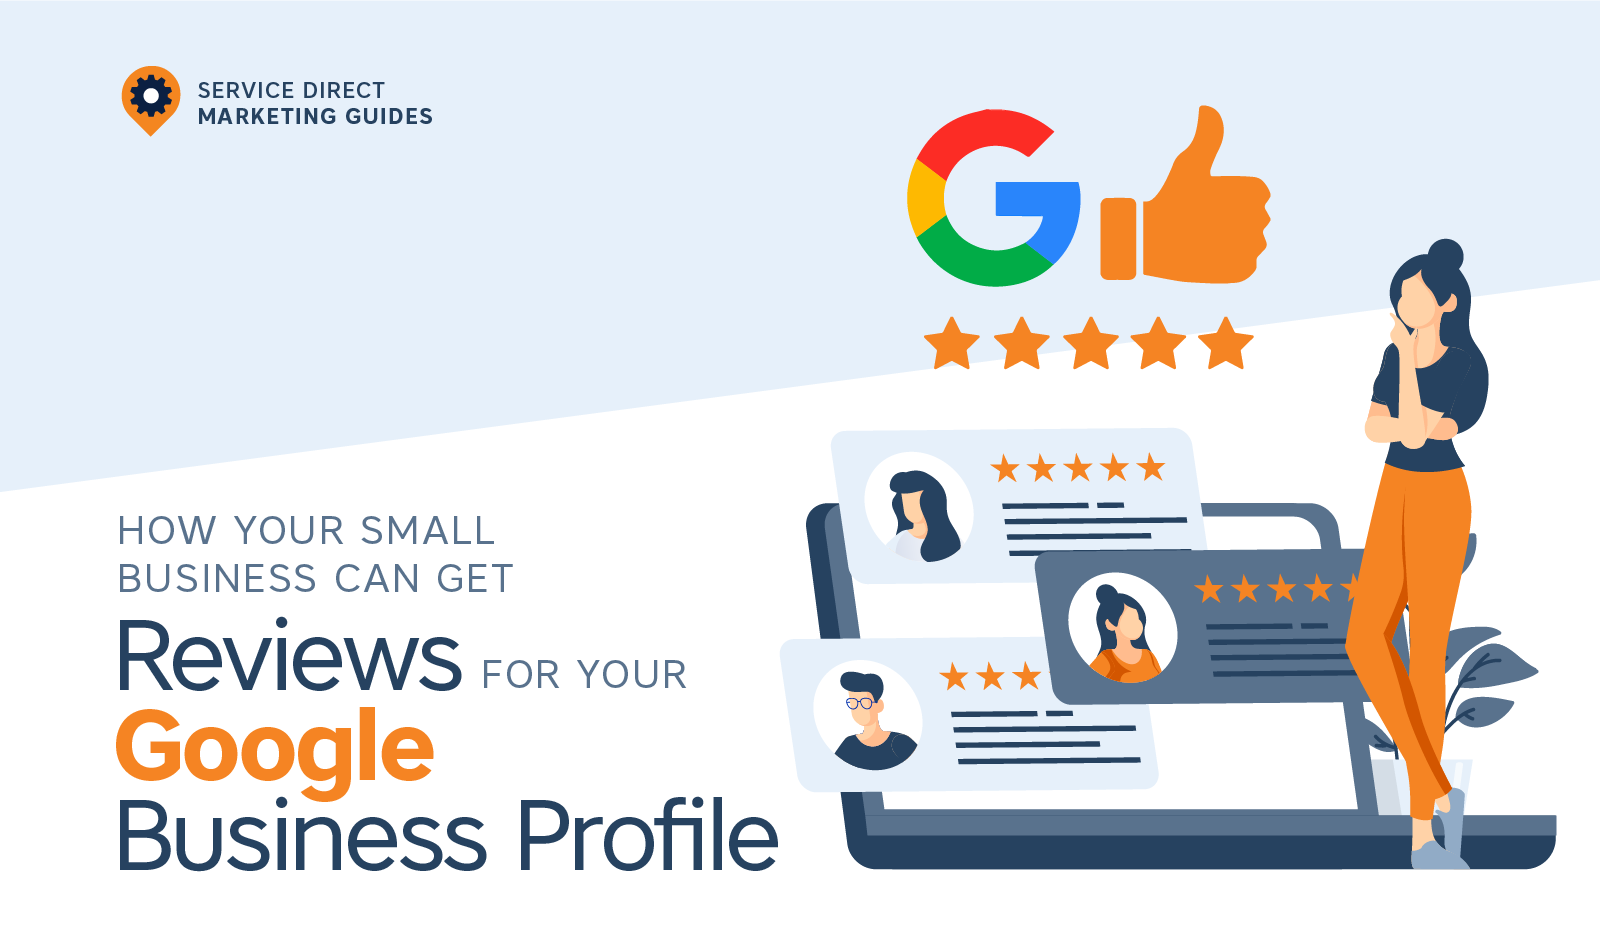 How Your Small Business Can Get Reviews for Your Google Business Profile